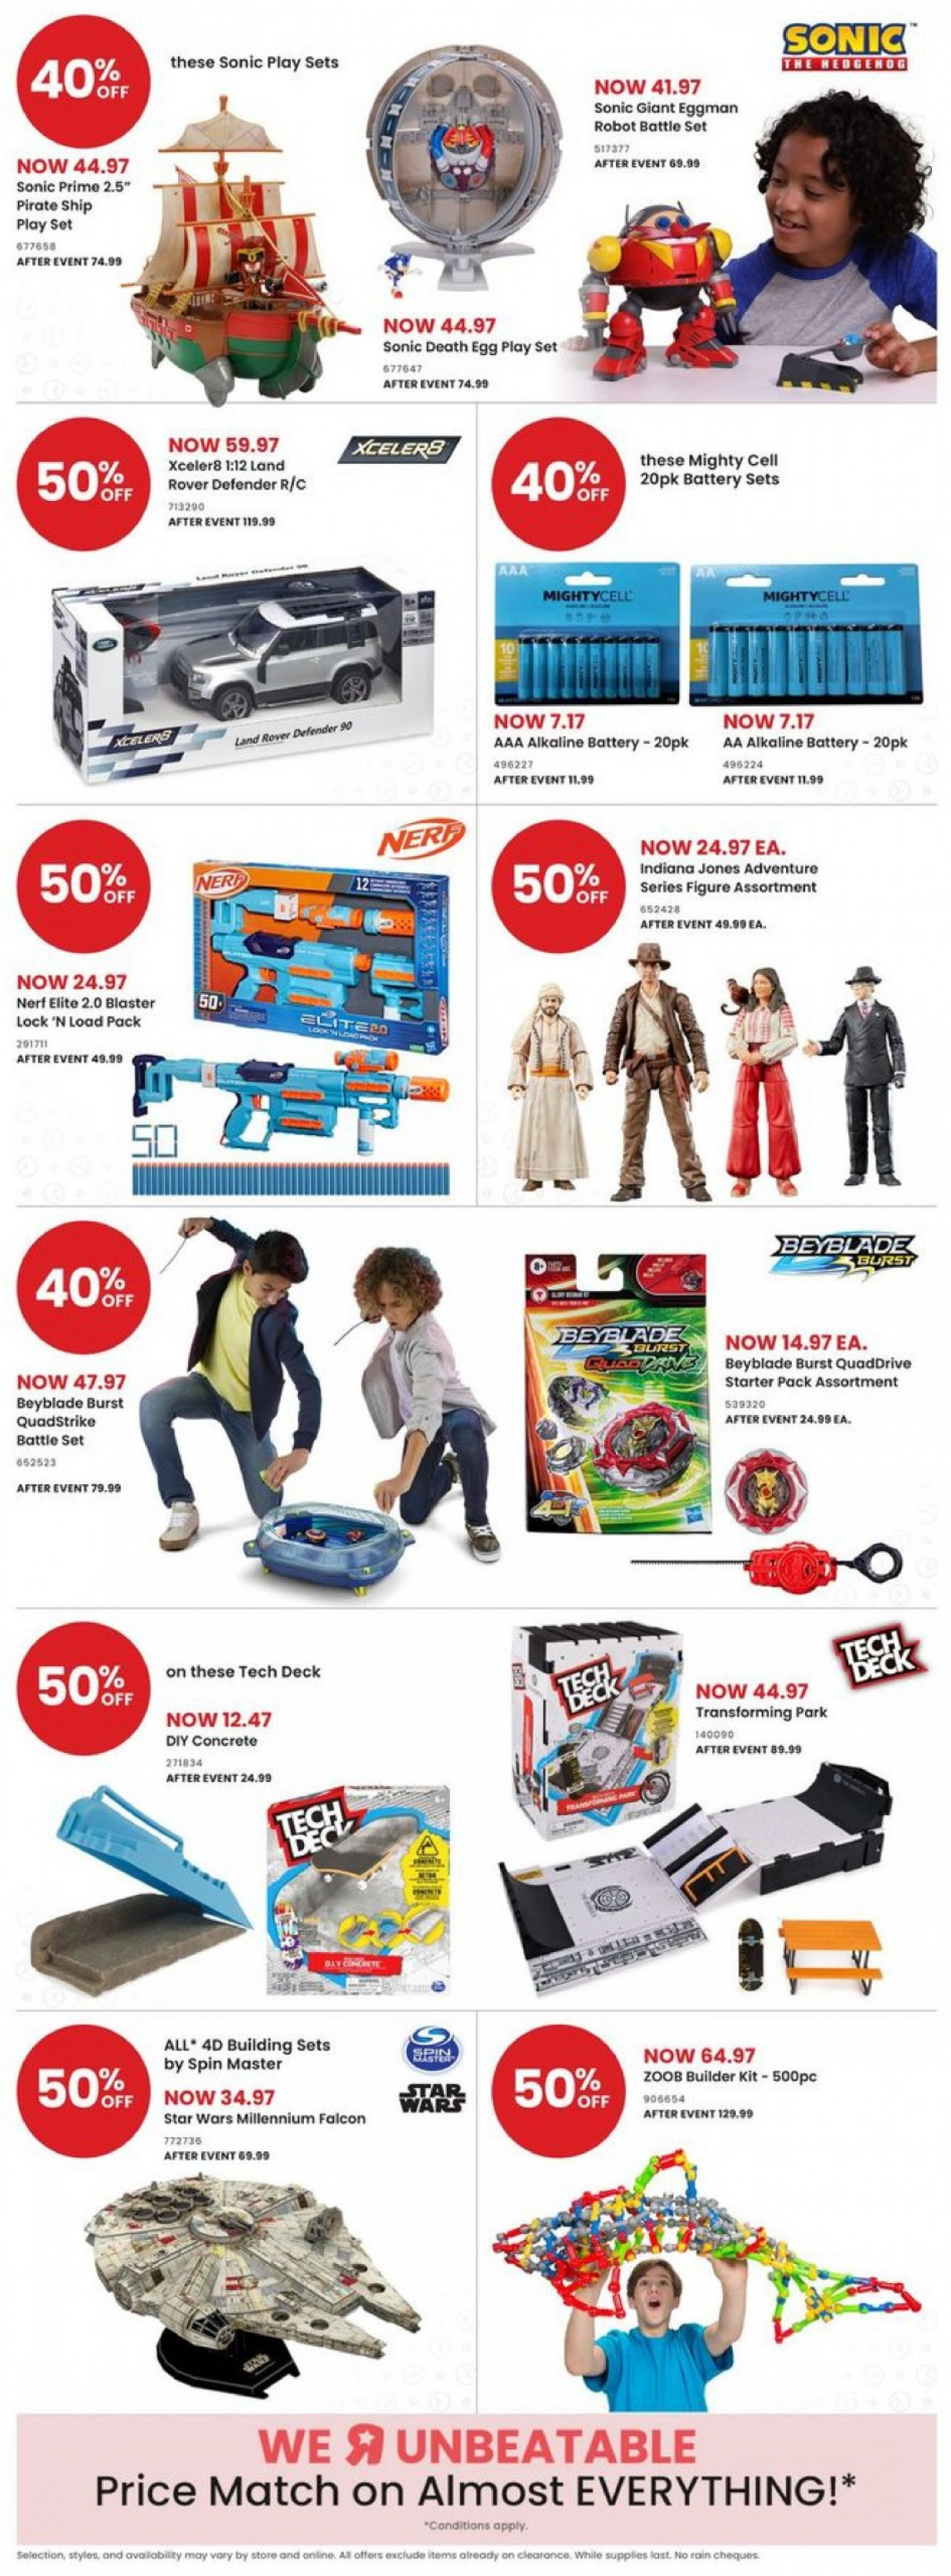 toys-r-us - Toysrus flyer current 30.05. - 12.06. - page: 2